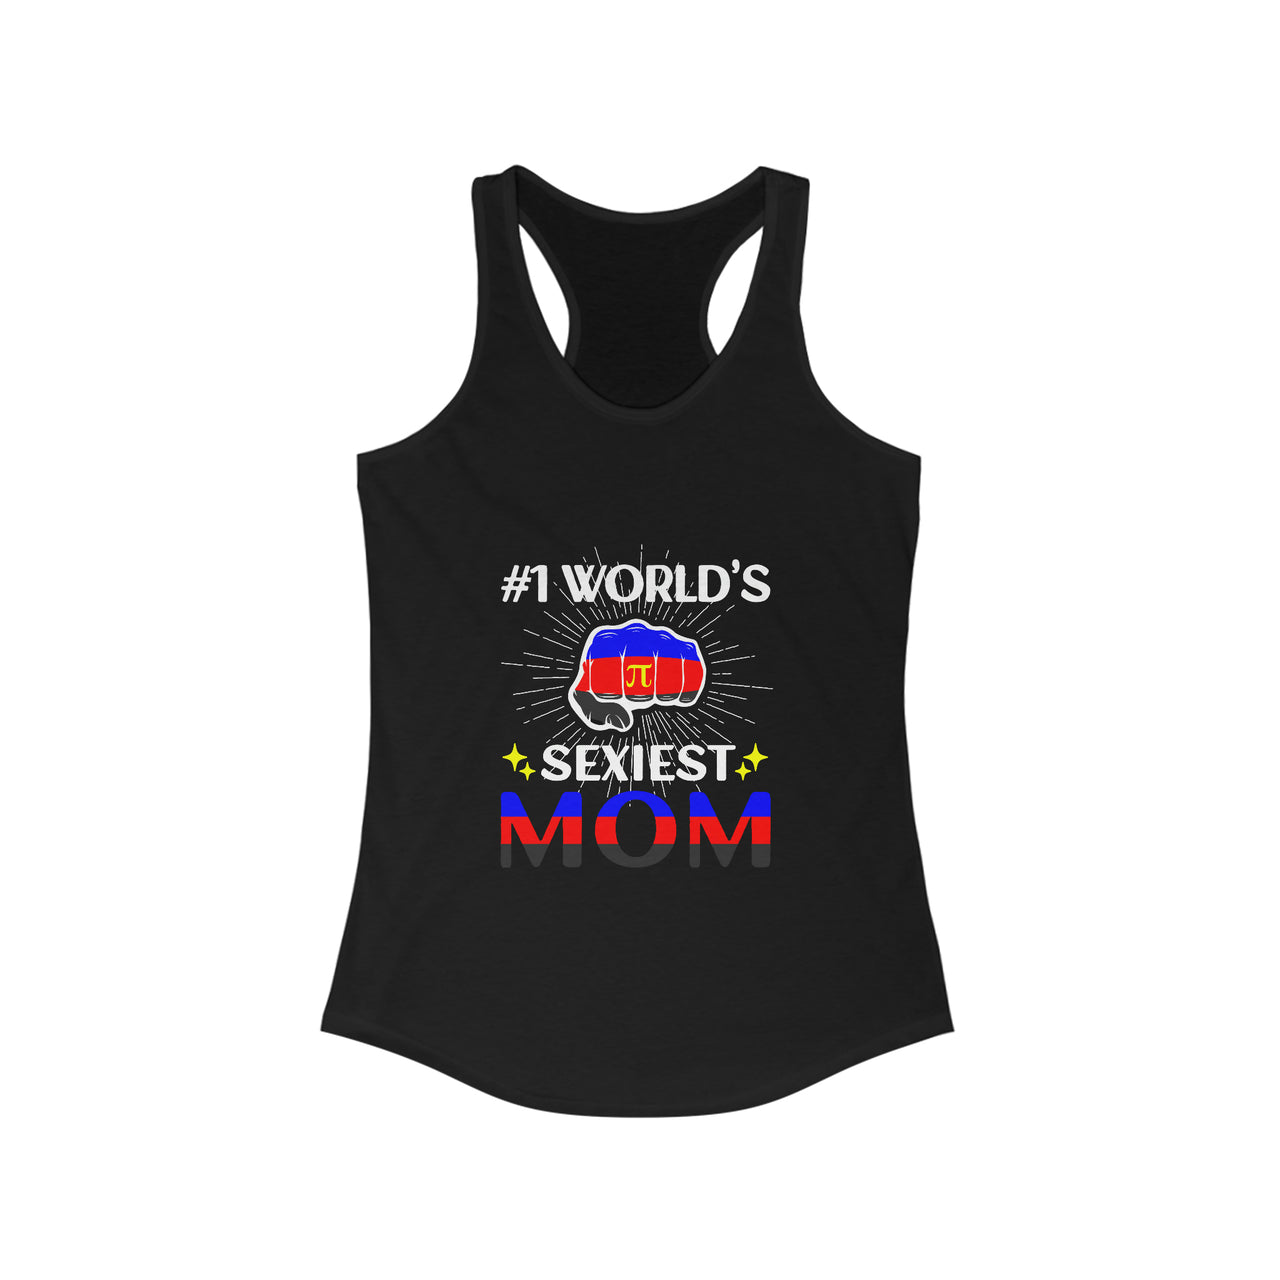 Polyamory Pride Flag Mother's Day Ideal Racerback Tank - #1 World's Sexiest Mom SHAVA CO